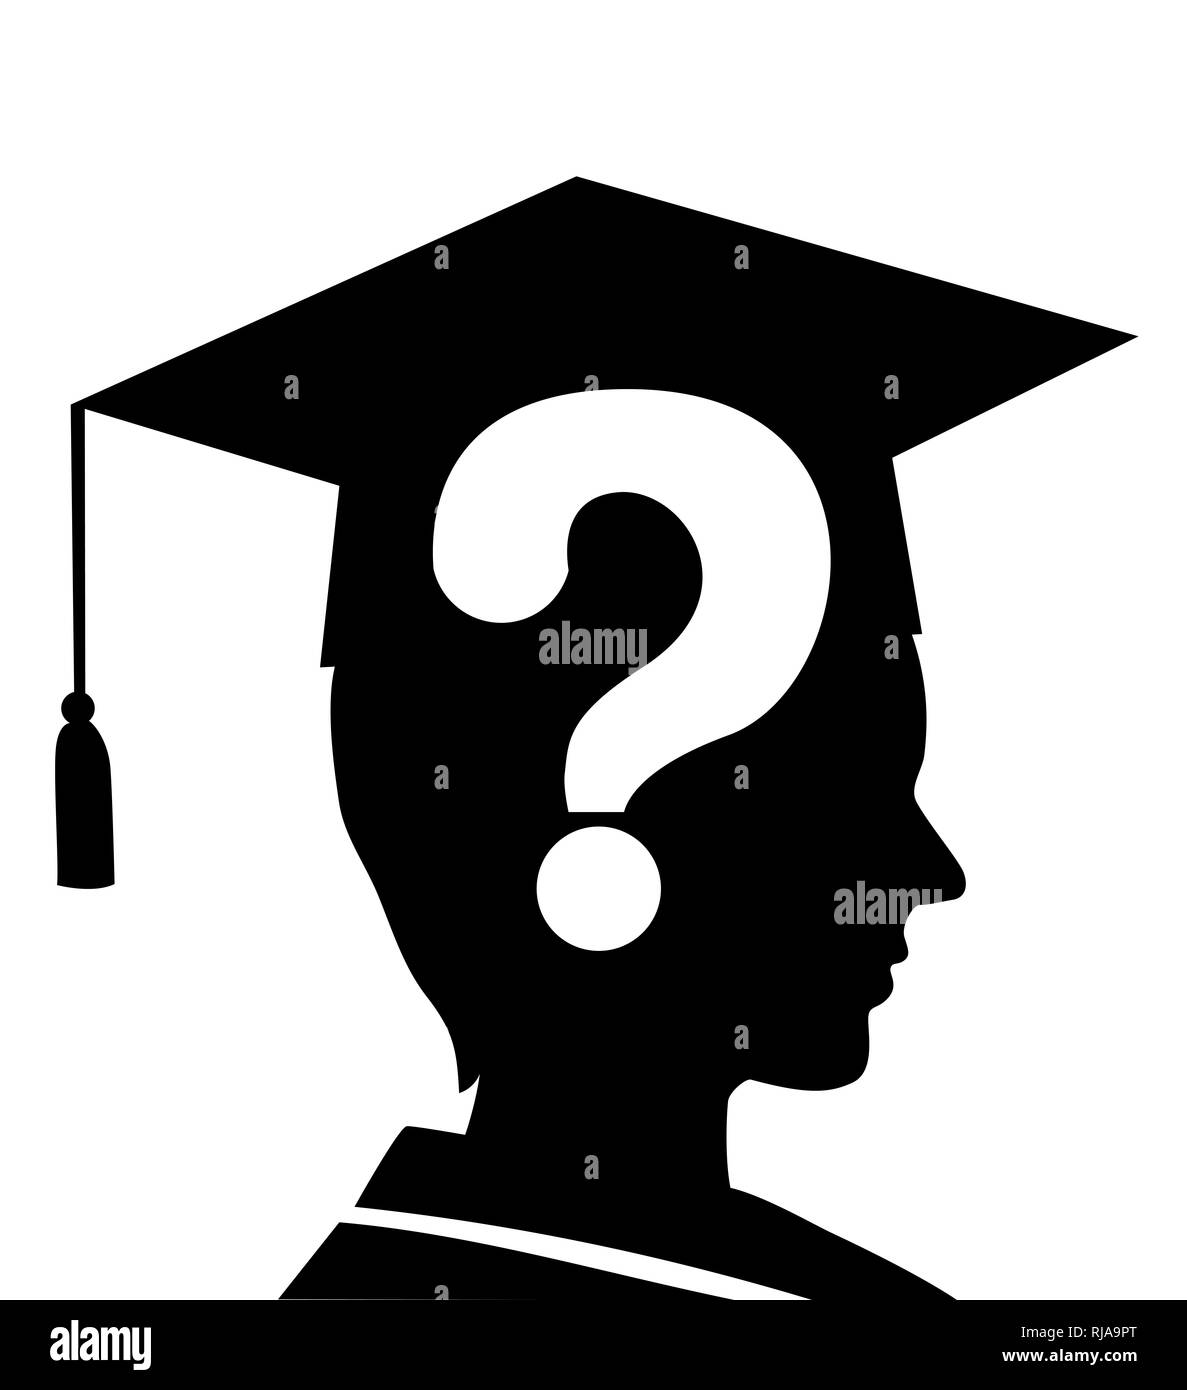 Illustration of a Man Silhouette with Graduation Cap and Question Mark Stock Photo